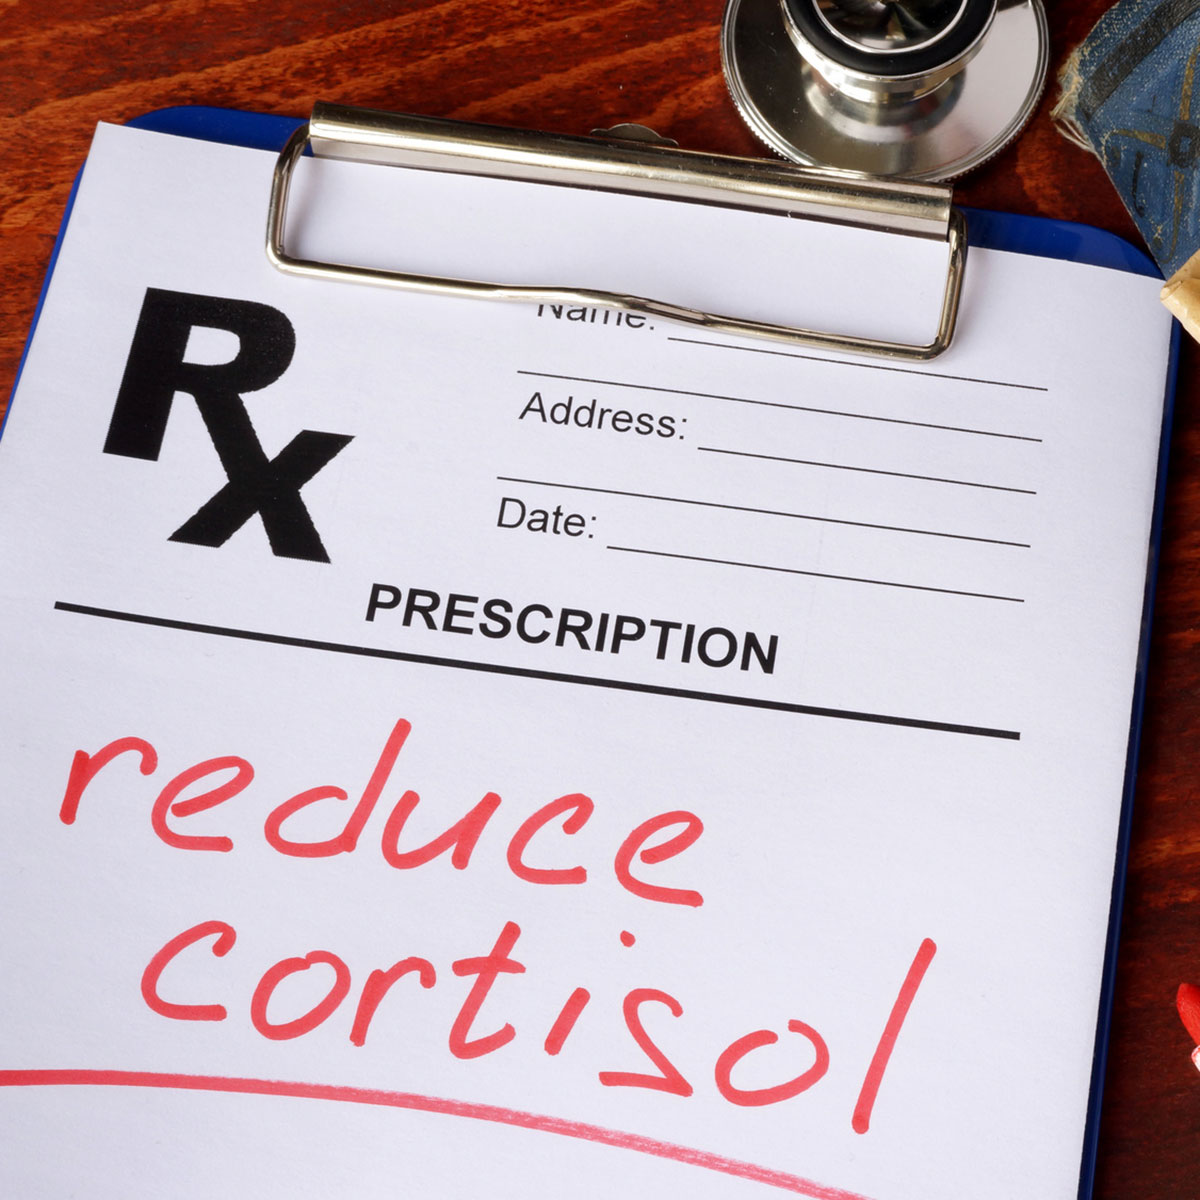 warning signs of high cortisol levels and what to do about